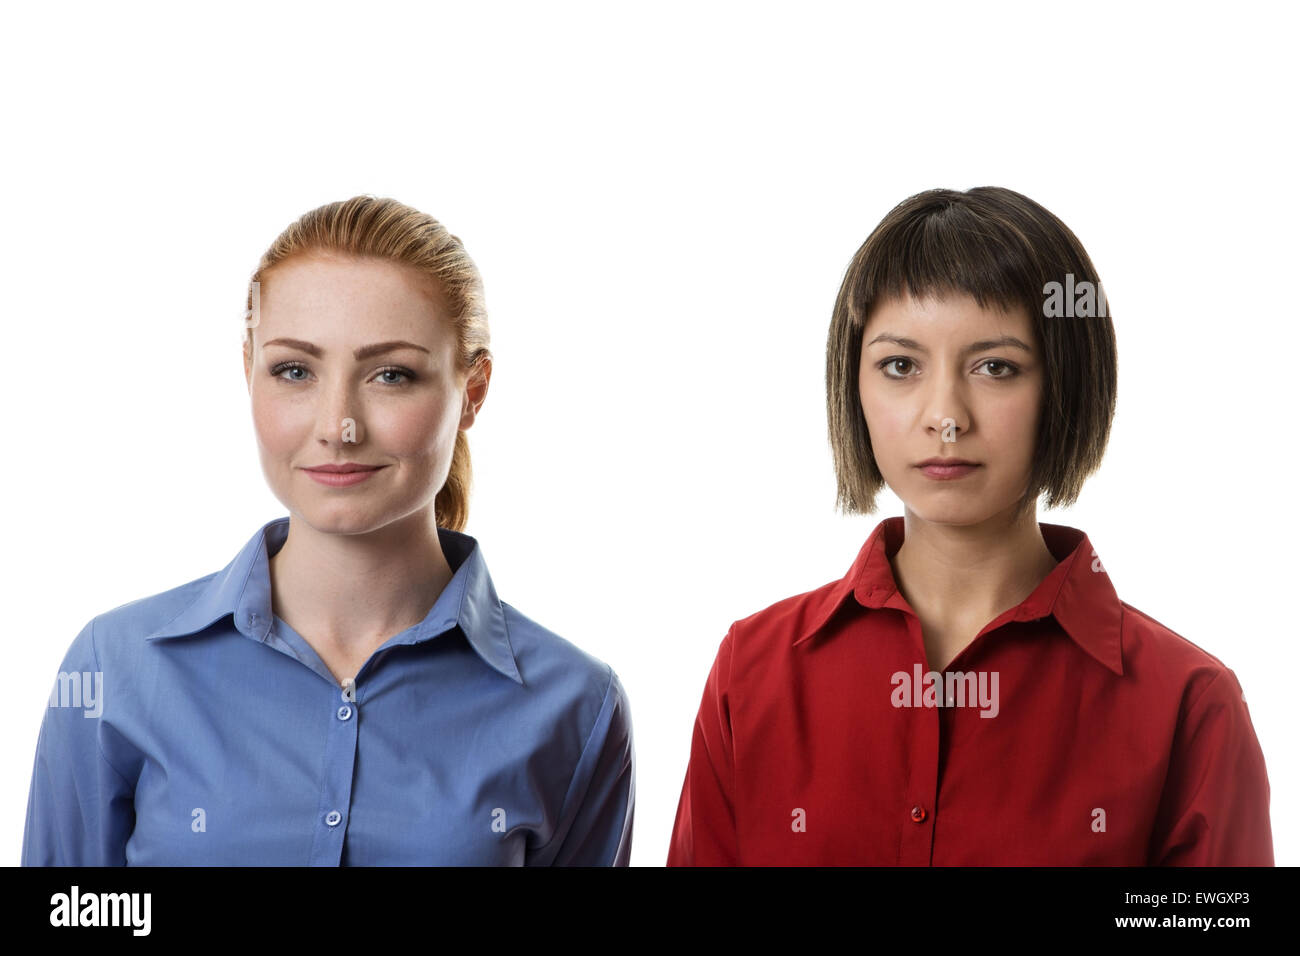 two business woman with different face expressions sanding side by side with contempt on ther face Stock Photo